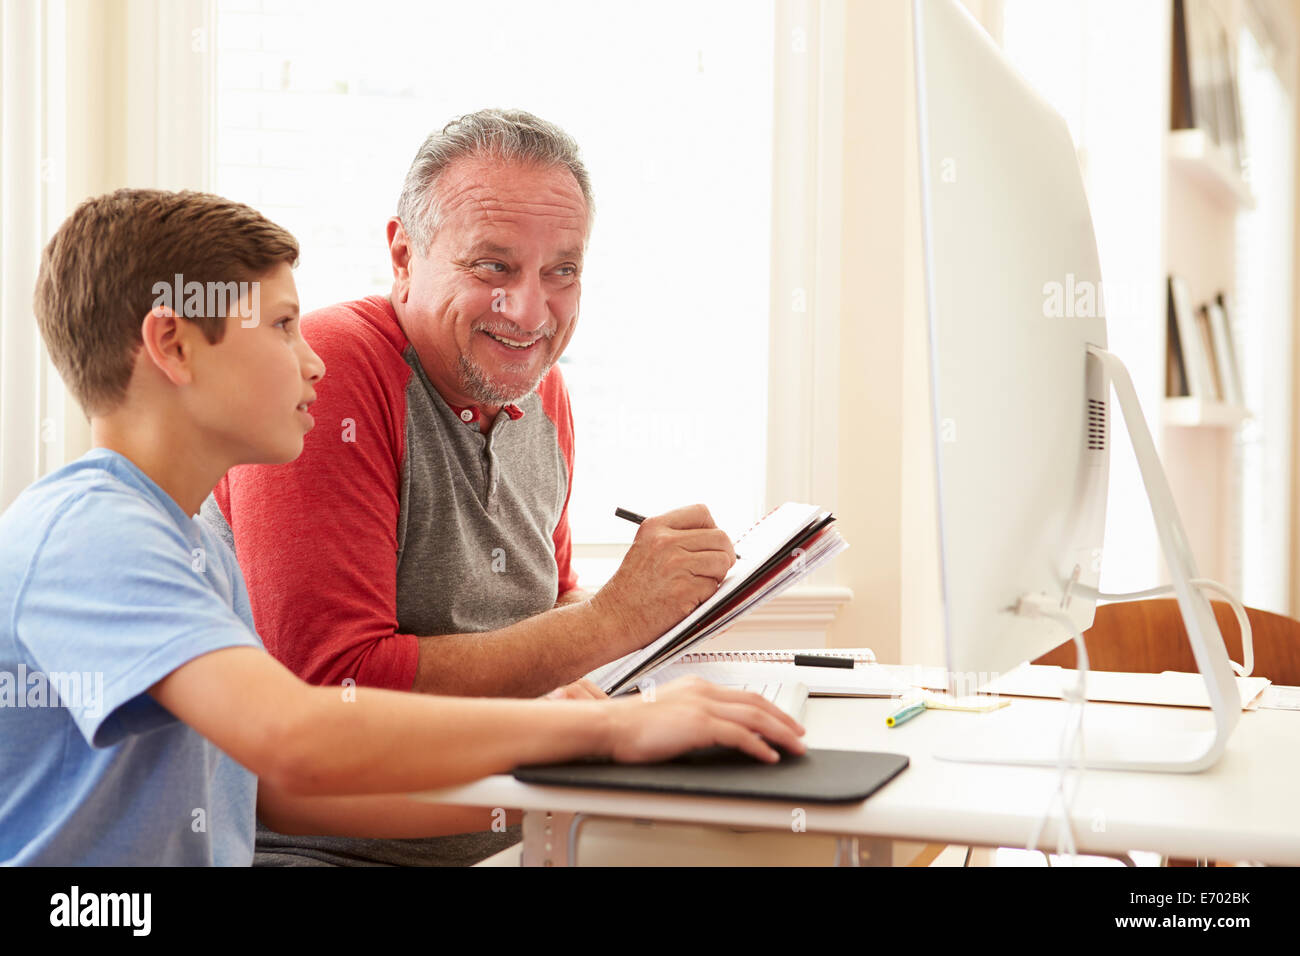 Grandson Teaching Grandfather To Use Computer Stock Photo